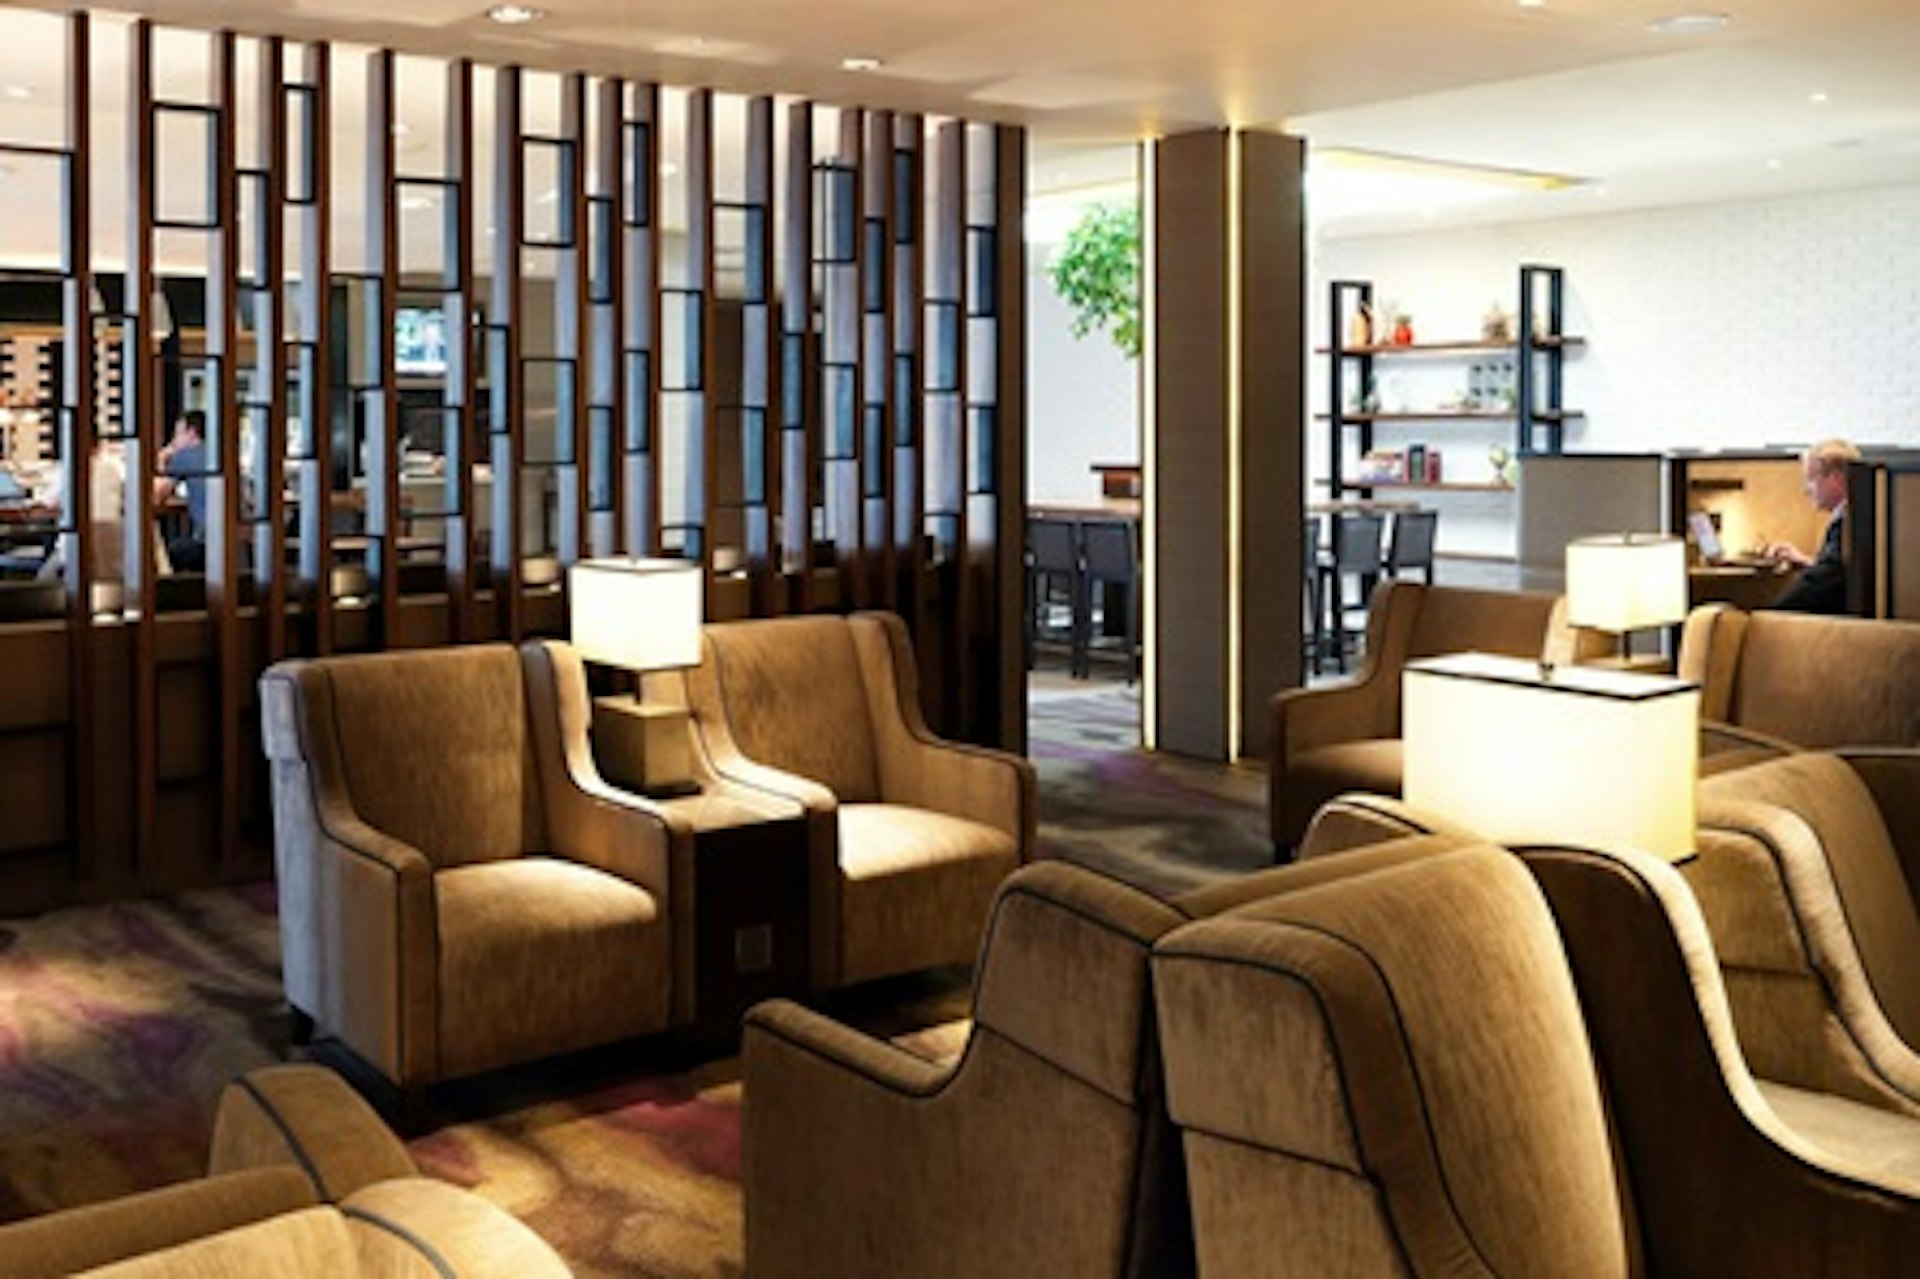 Plaza Premium Lounge Experience for Two at London Heathrow Airport 4